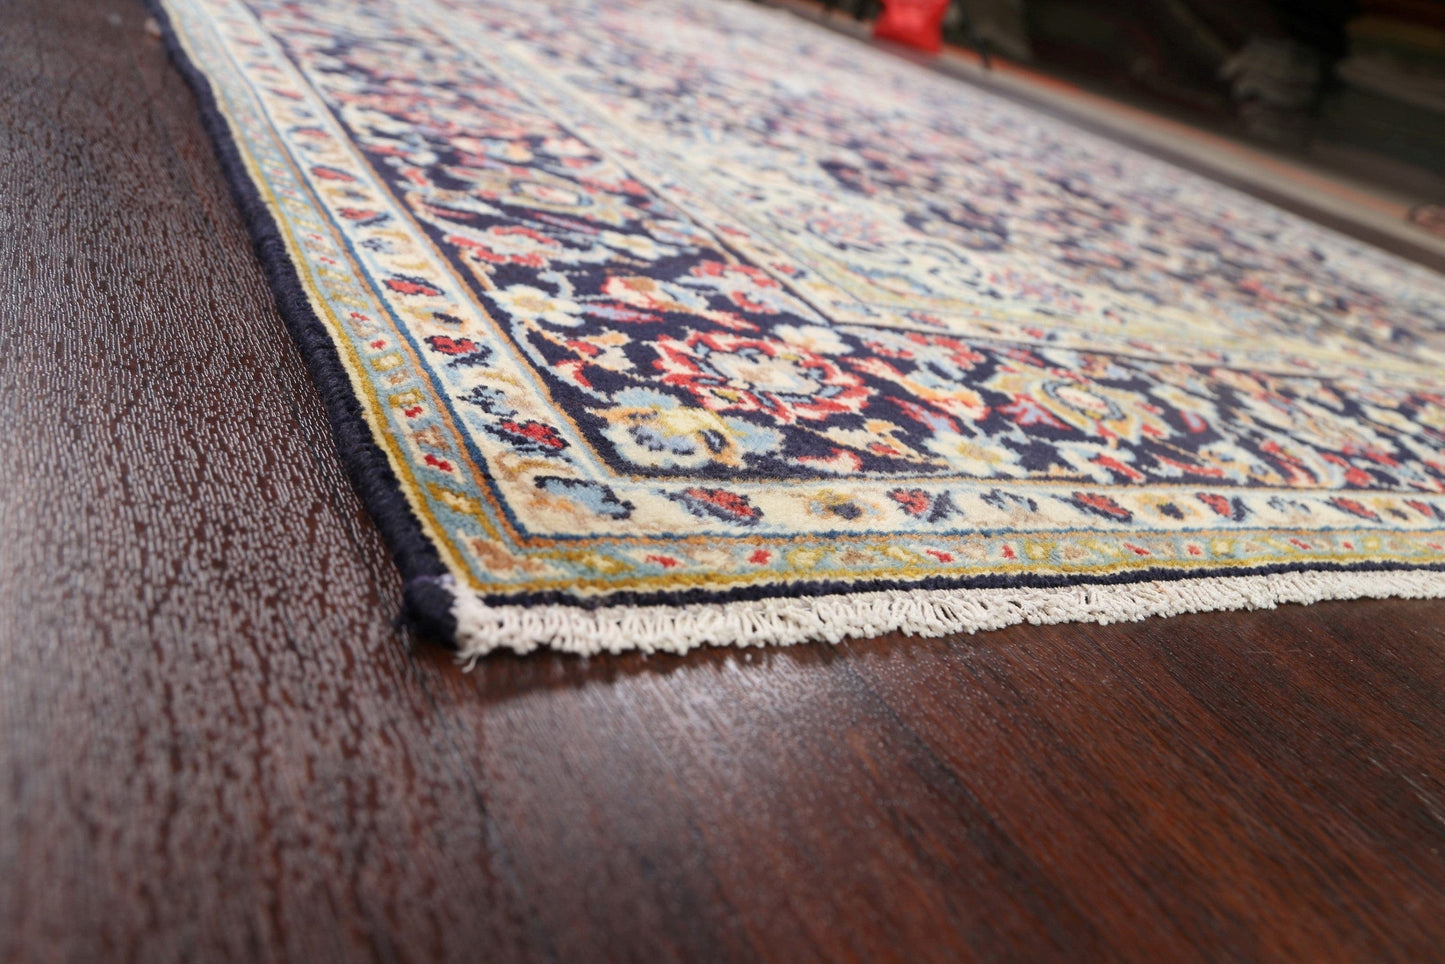 Floral Najafabad Persian Area Rug 7x10